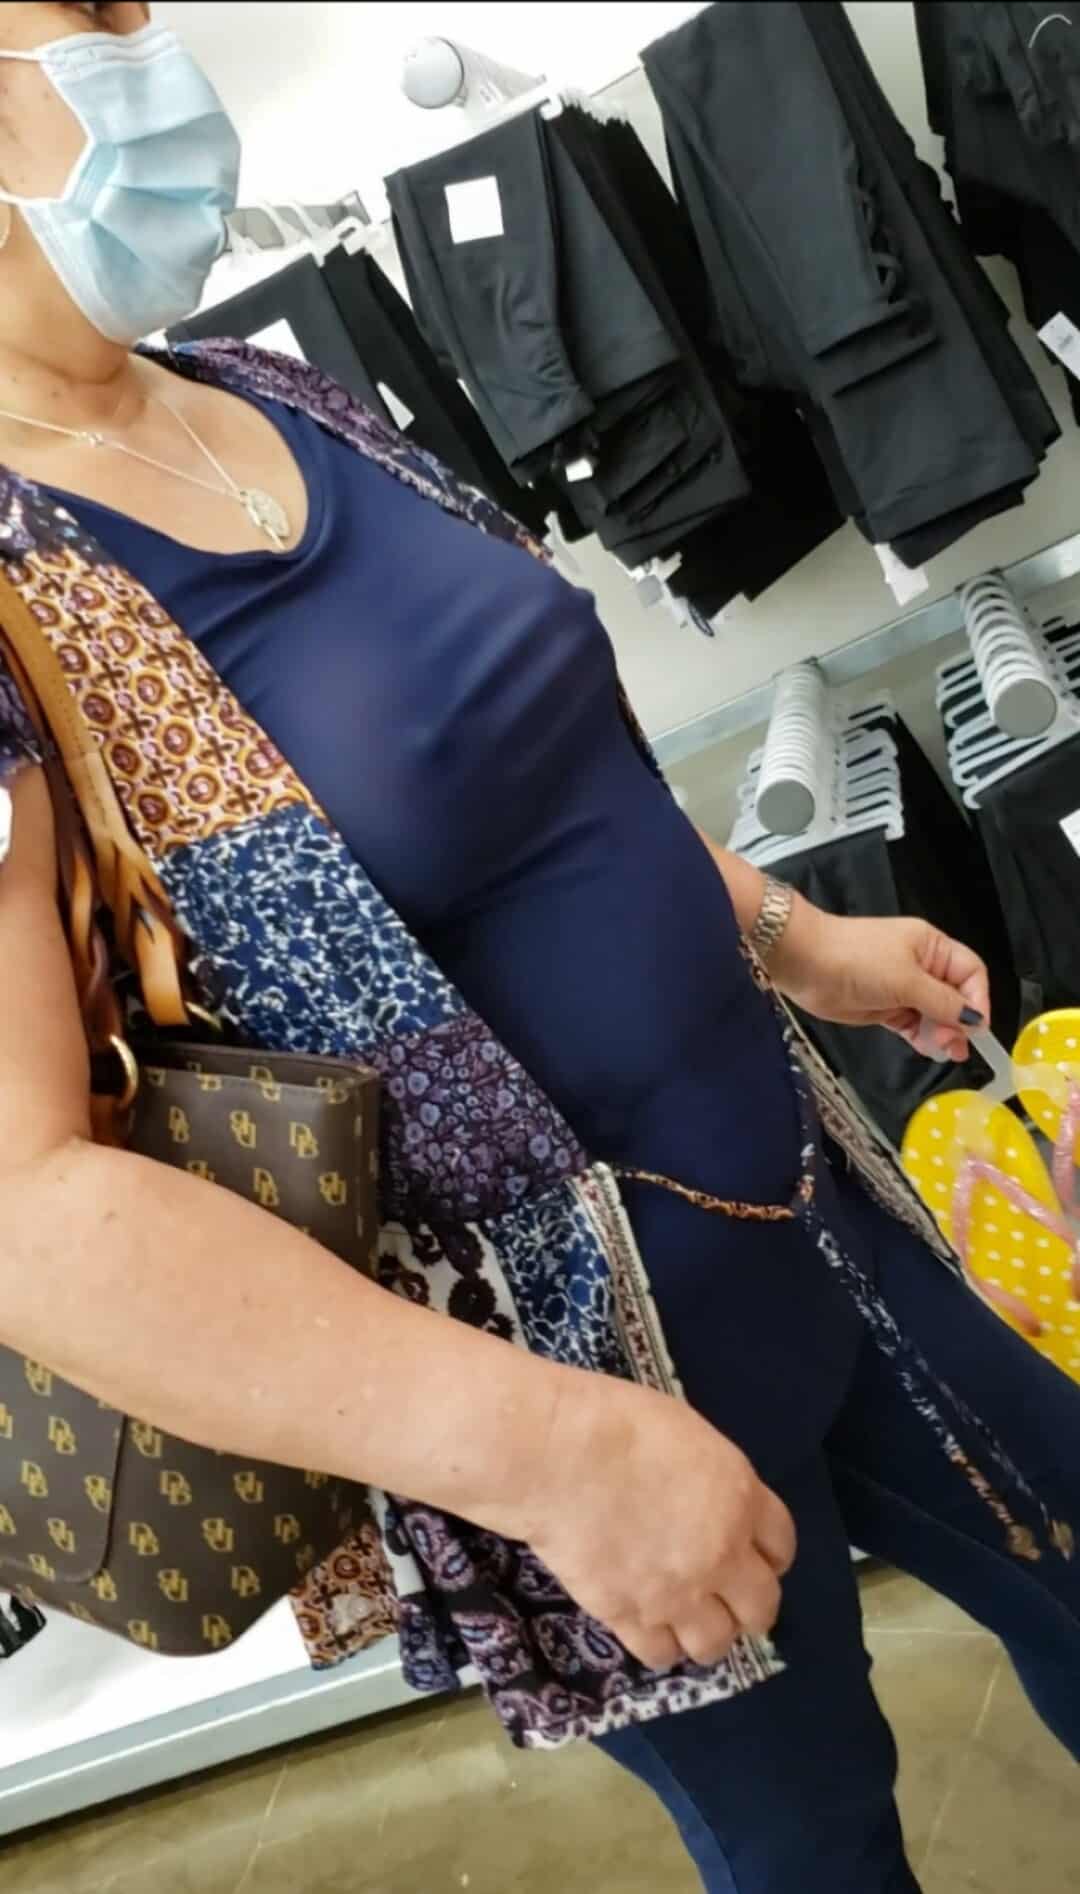 Flashing Store Pics: Braless while shopping Shopping with no bra and hard nipples